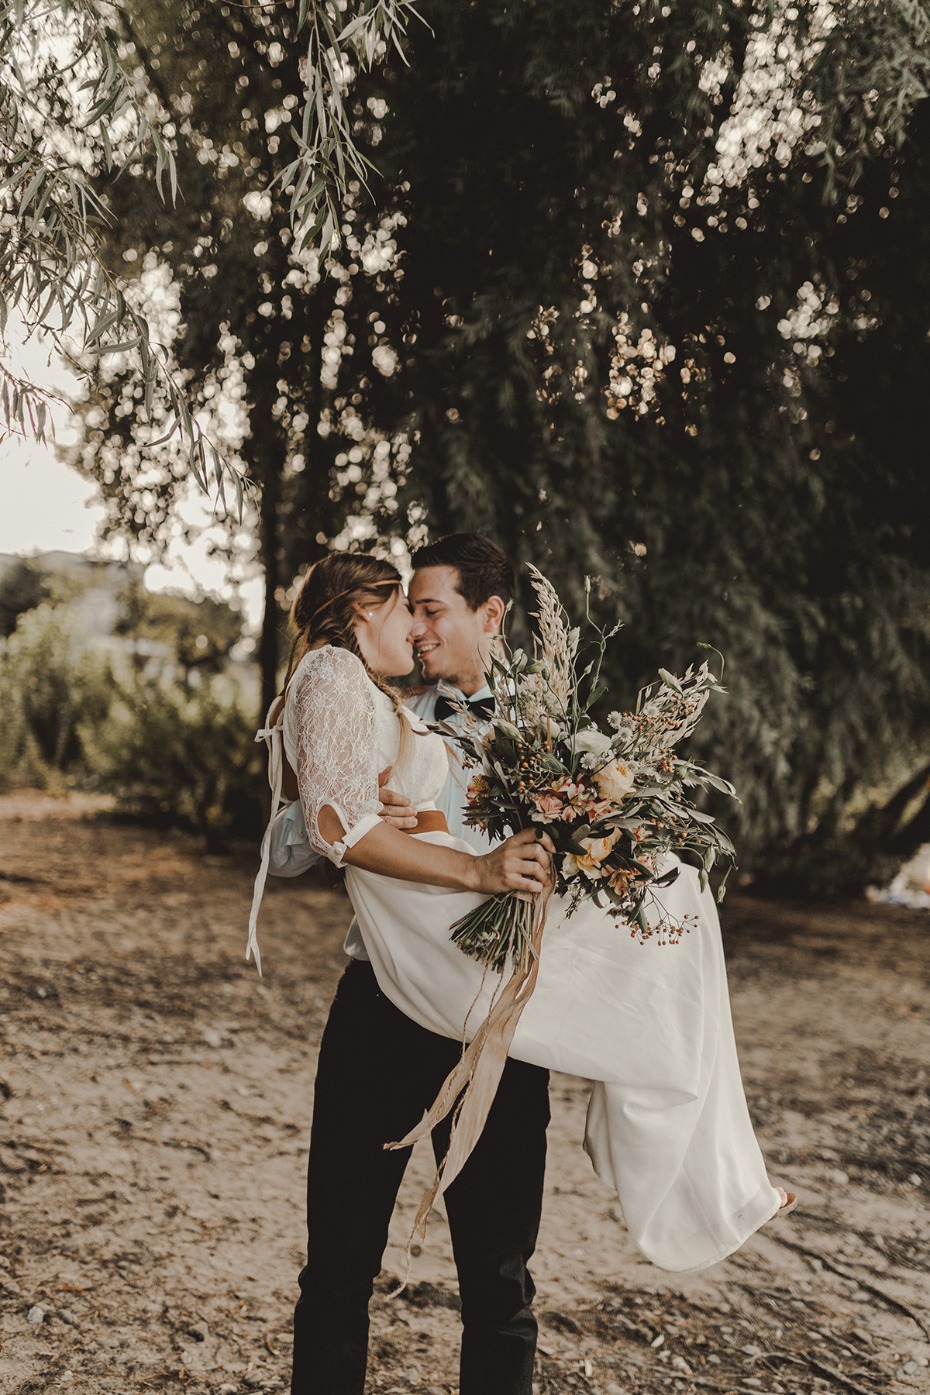 Elopement wedding ideas from simple to planned out.